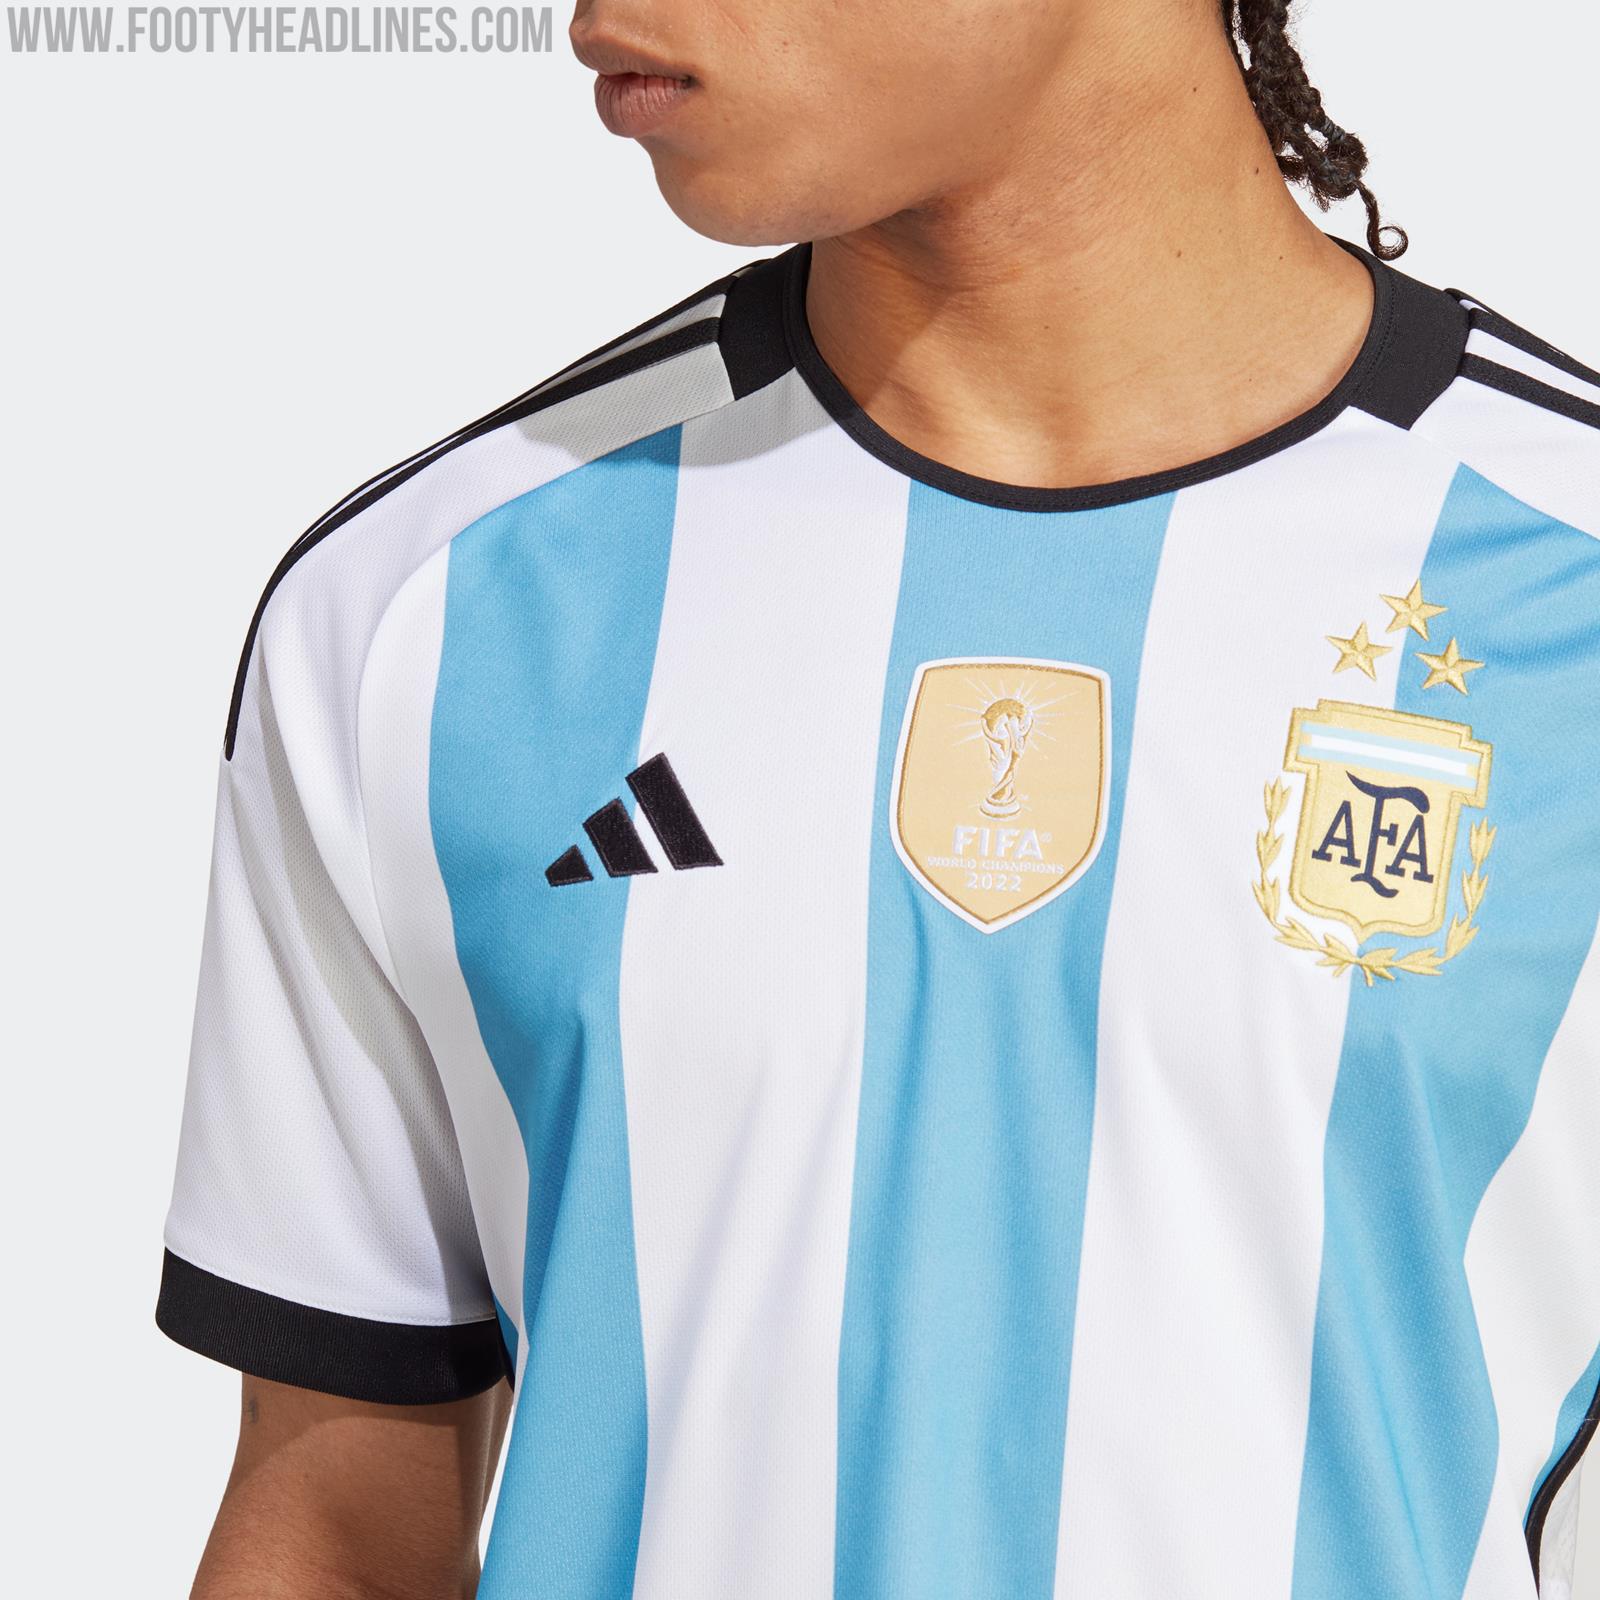 Is the AUTHENTIC Argentina jersey (w/ 3 stars) available yet? Or